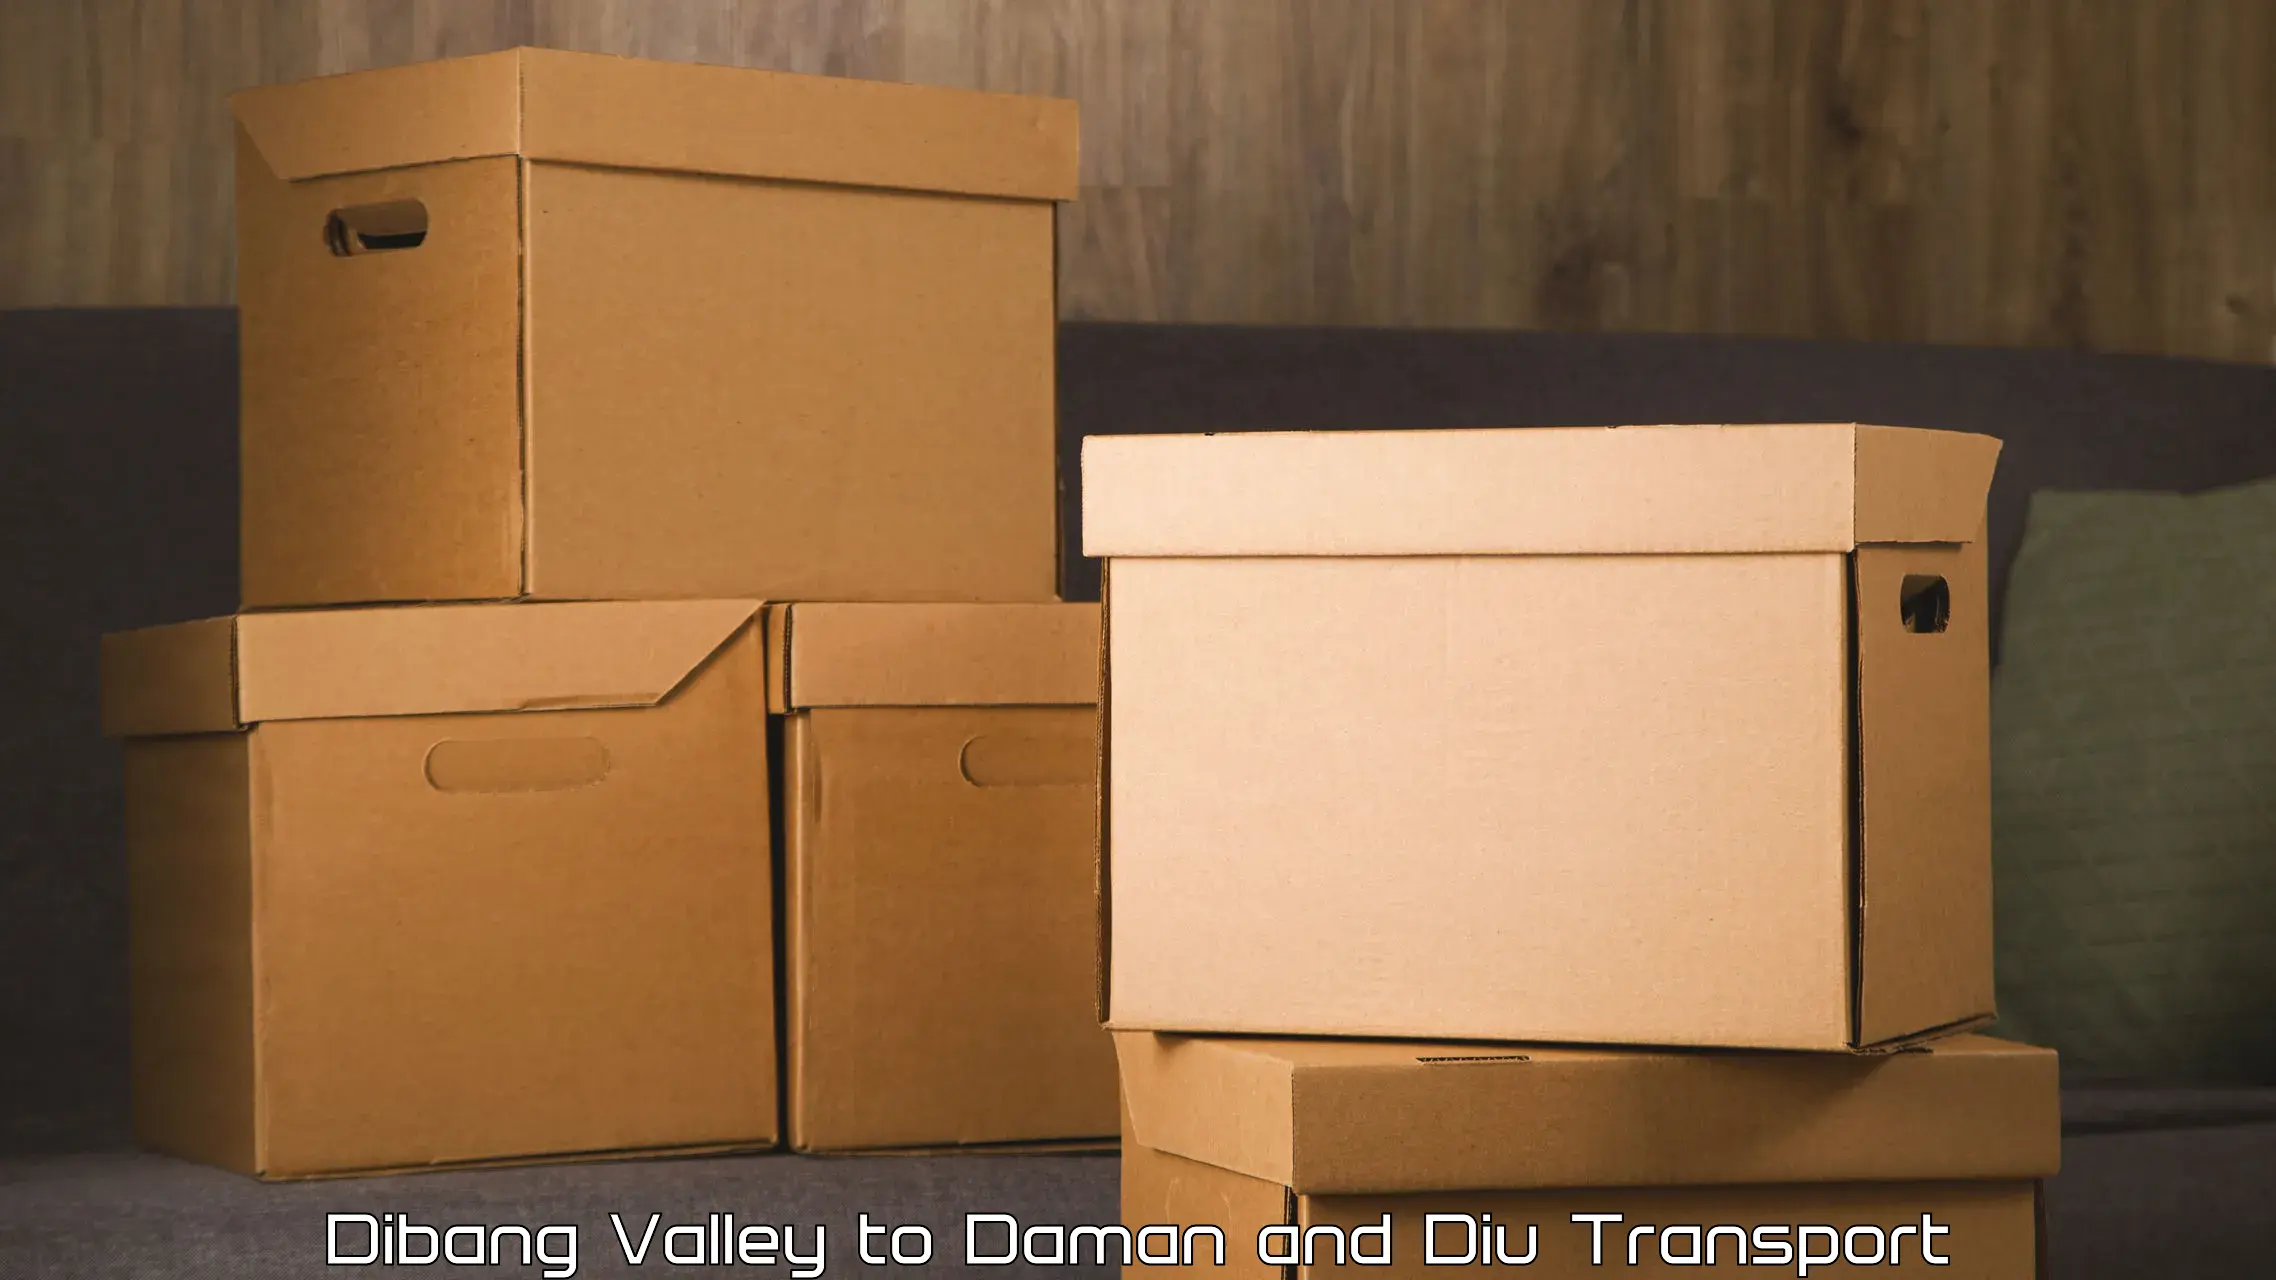 Parcel transport services Dibang Valley to Daman and Diu